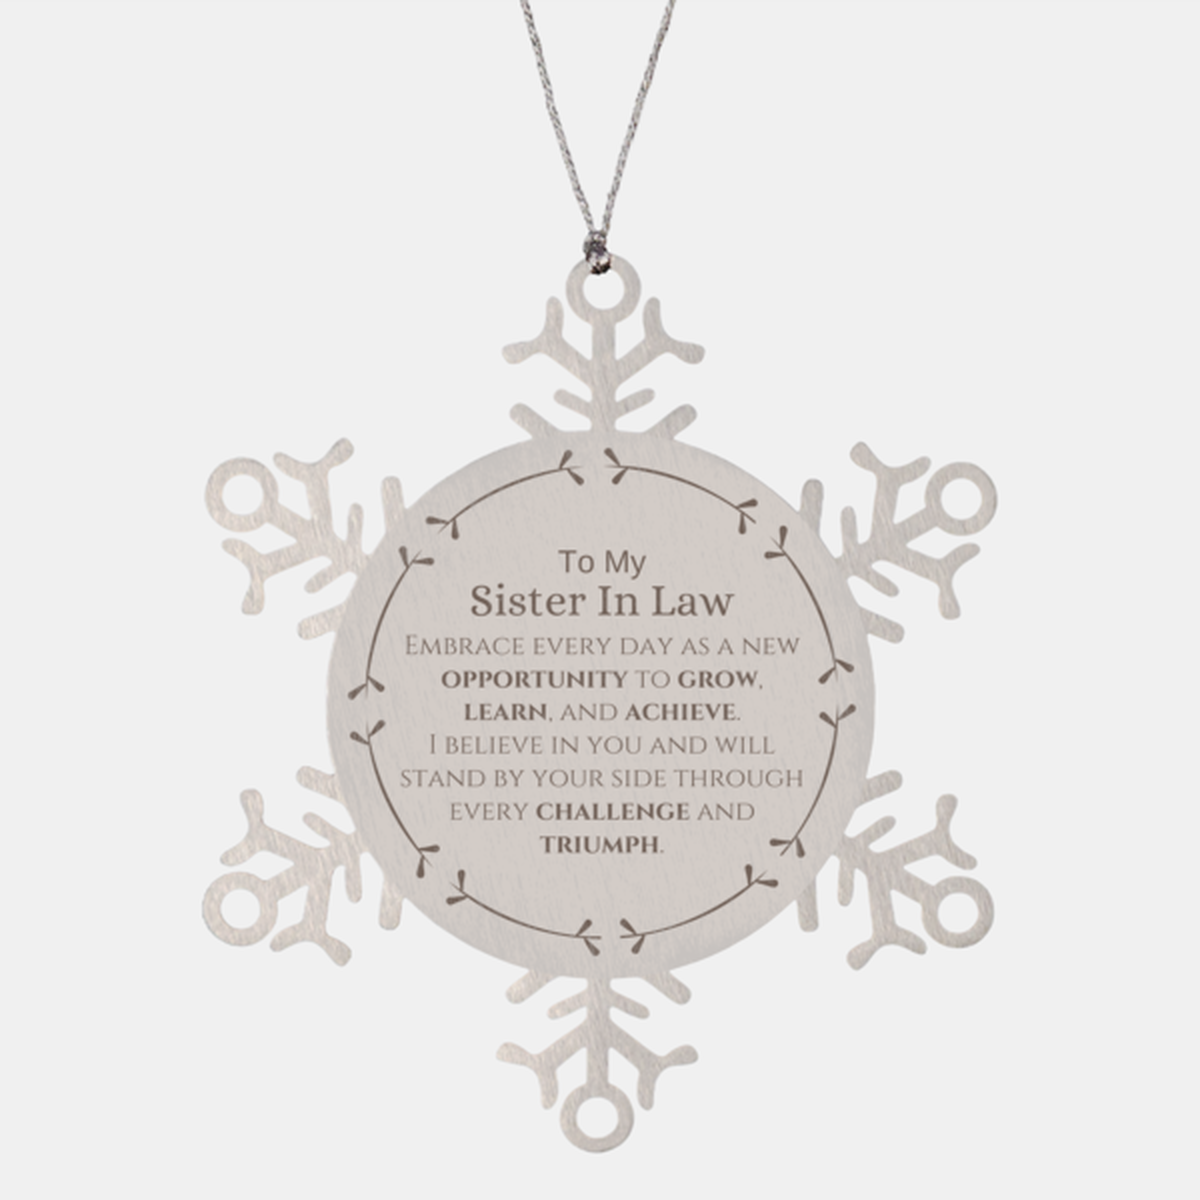 To My Sister In Law Gifts, I believe in you and will stand by your side, Inspirational Snowflake Ornament For Sister In Law, Birthday Christmas Motivational Sister In Law Gifts